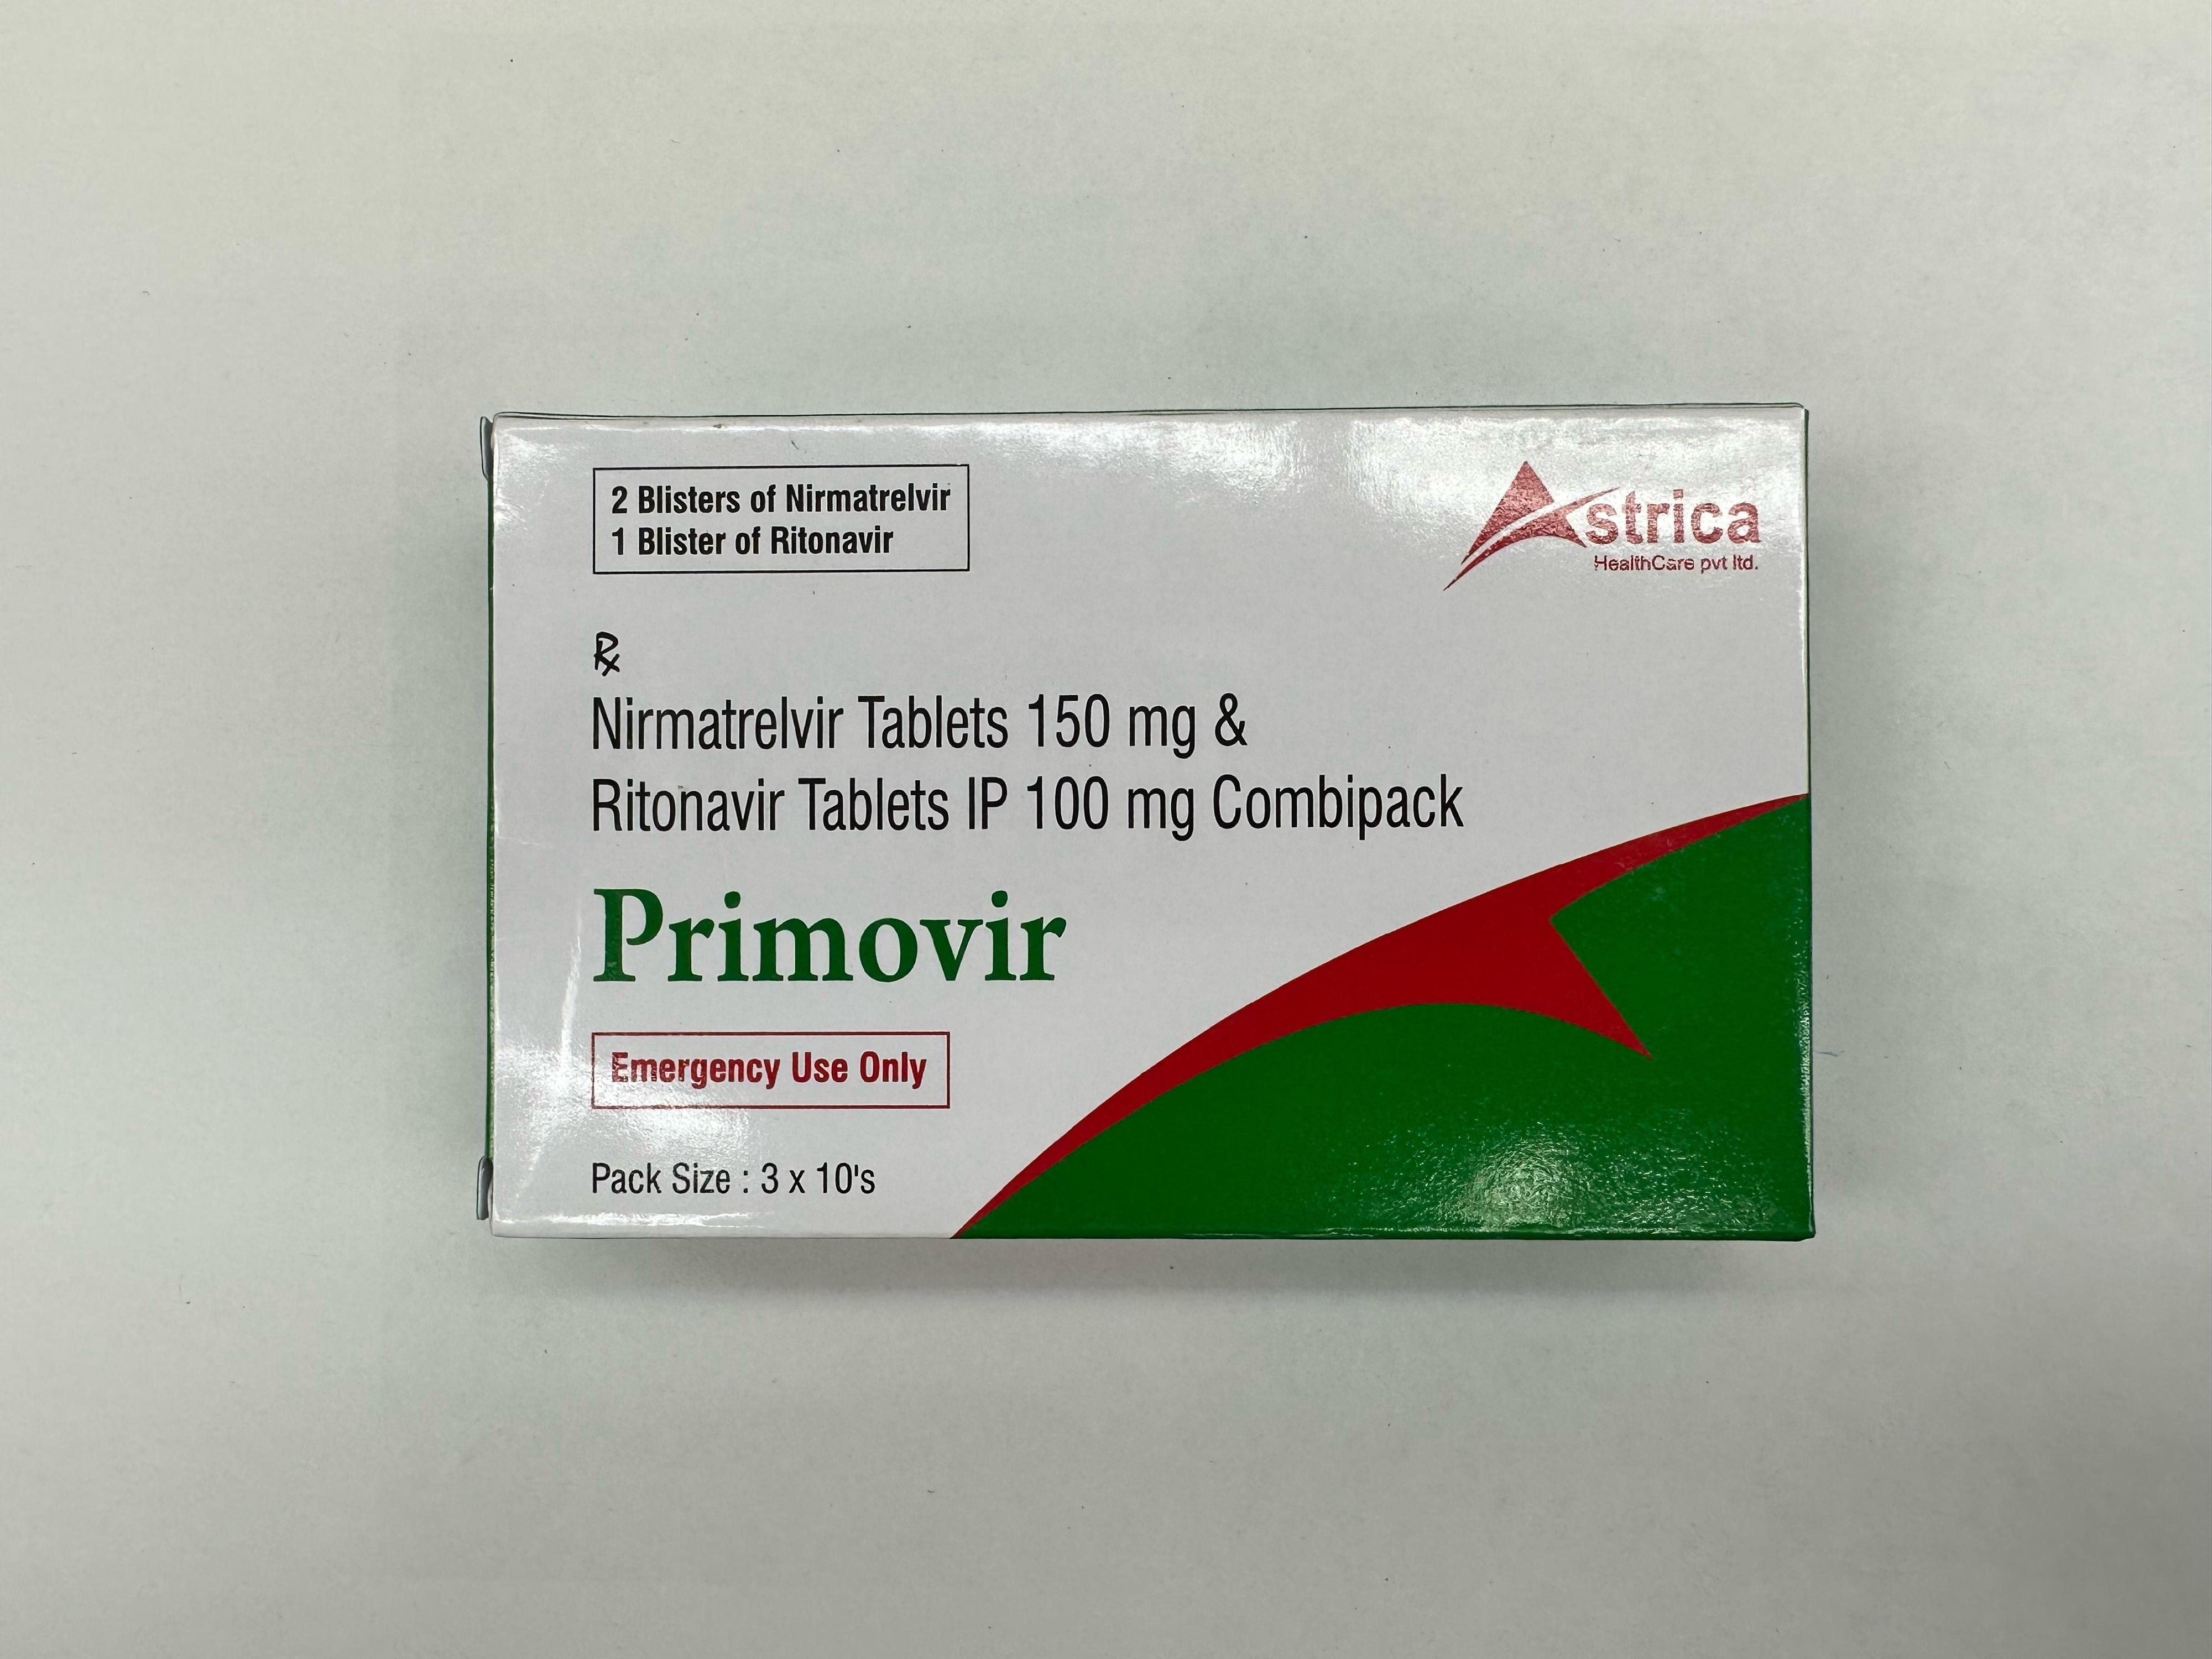 The Department of Health and the Police today (January 7) continued the joint operation against the illegal sale of COVID-19 oral drugs. During the operation, a suspected unregistered pharmaceutical product named "Primovir" was found to be sold at a drugstore in Yuen Long, and a 34-year-old man was arrested. Photo shows the product involved.